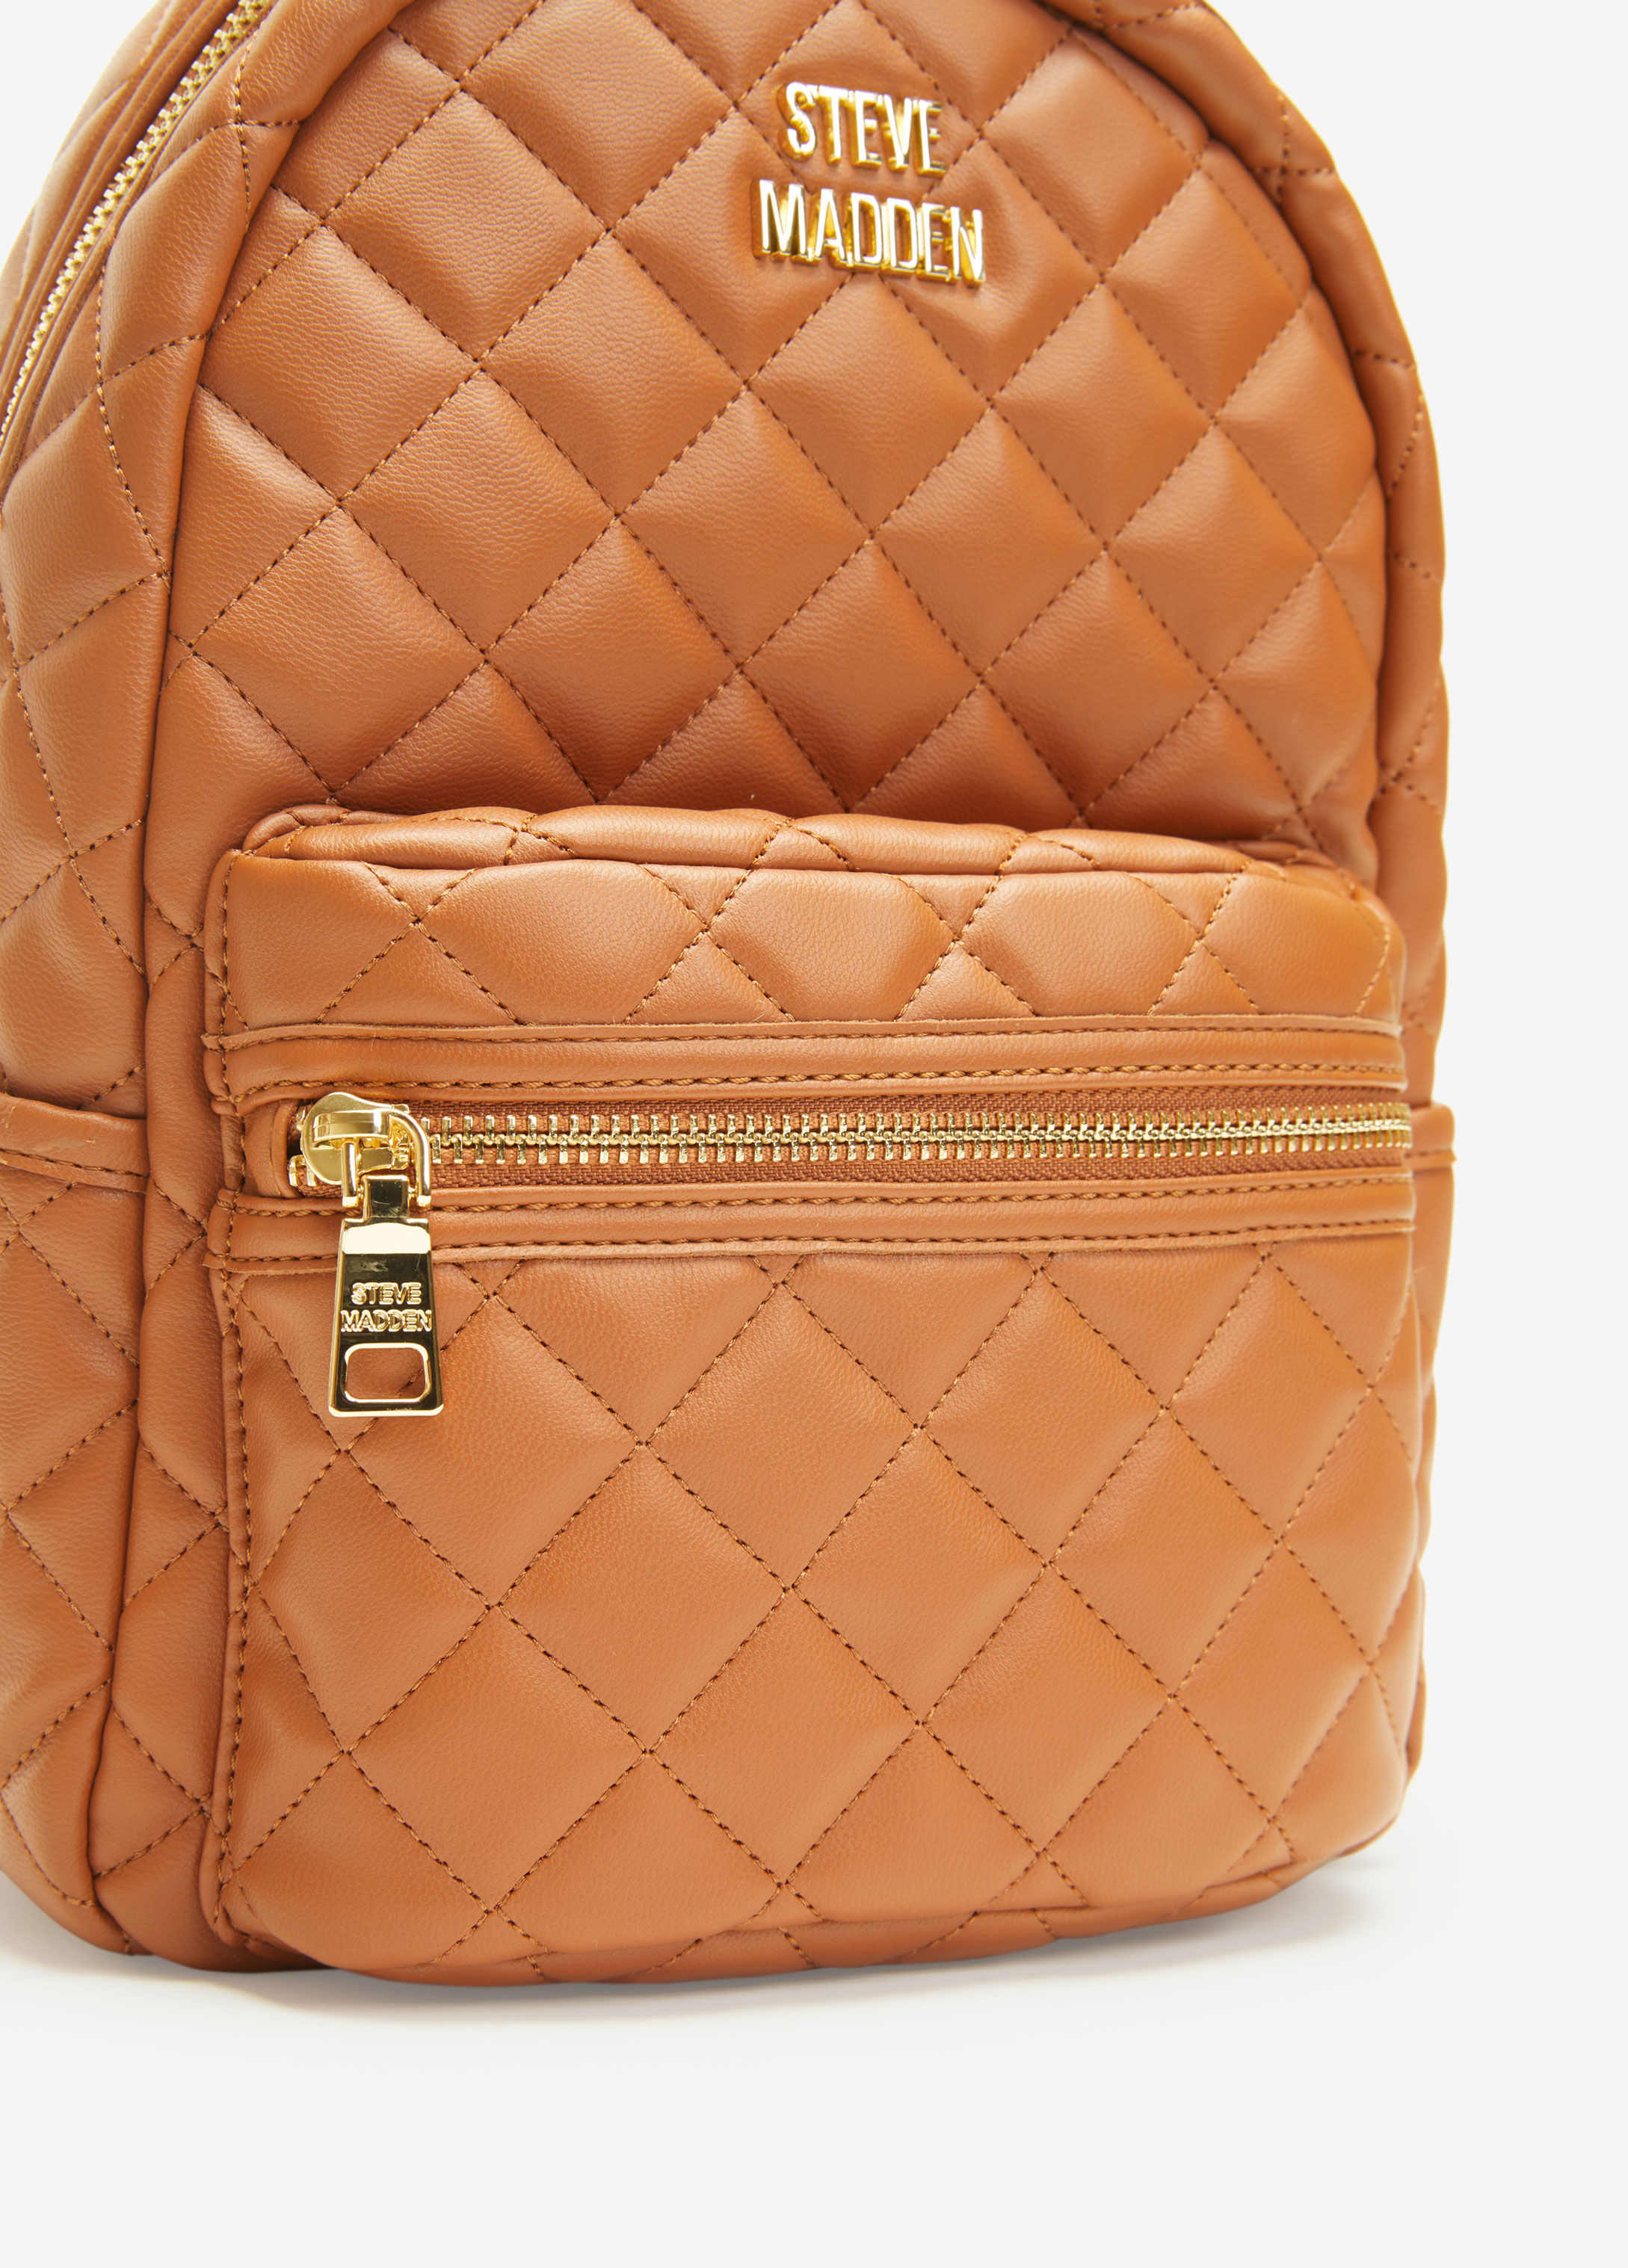  Steve Madden Roaring Mini Backpack, Brown Multi : Clothing,  Shoes & Jewelry